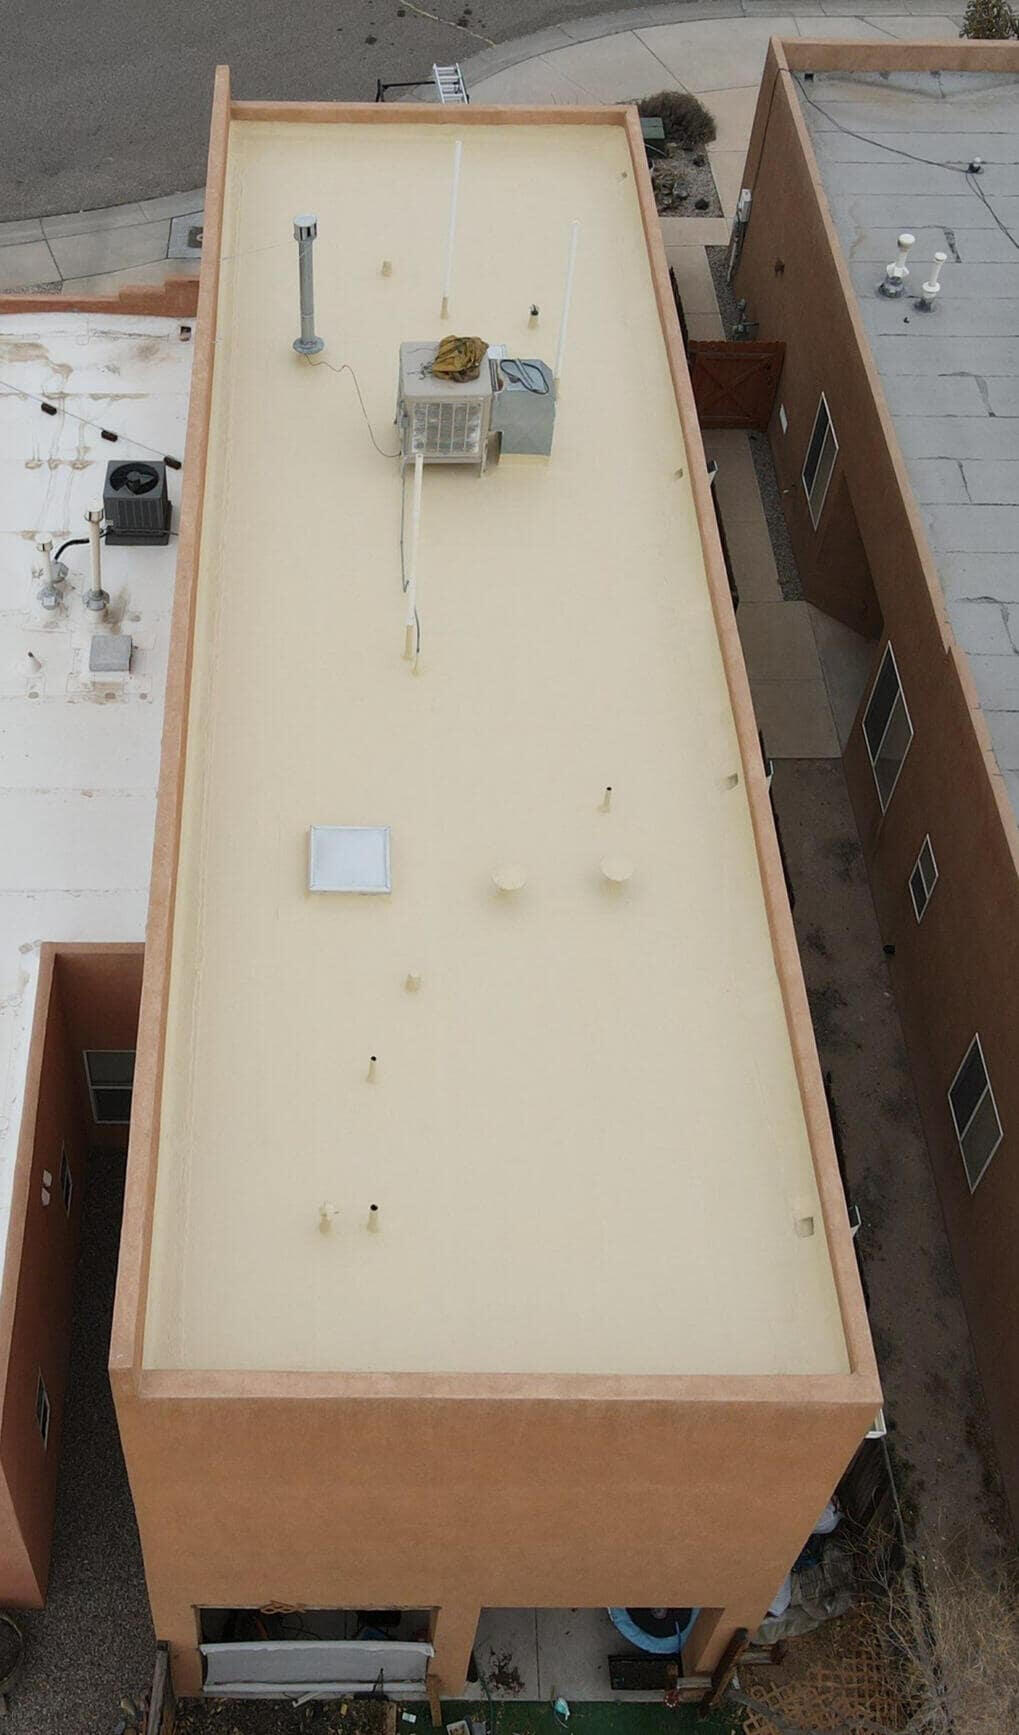 Drone view from above of a two-storey residential home in Albuquerque, New Mexico, with a well-maintained tan silicone coating on the flat roof system, featuring skylights.